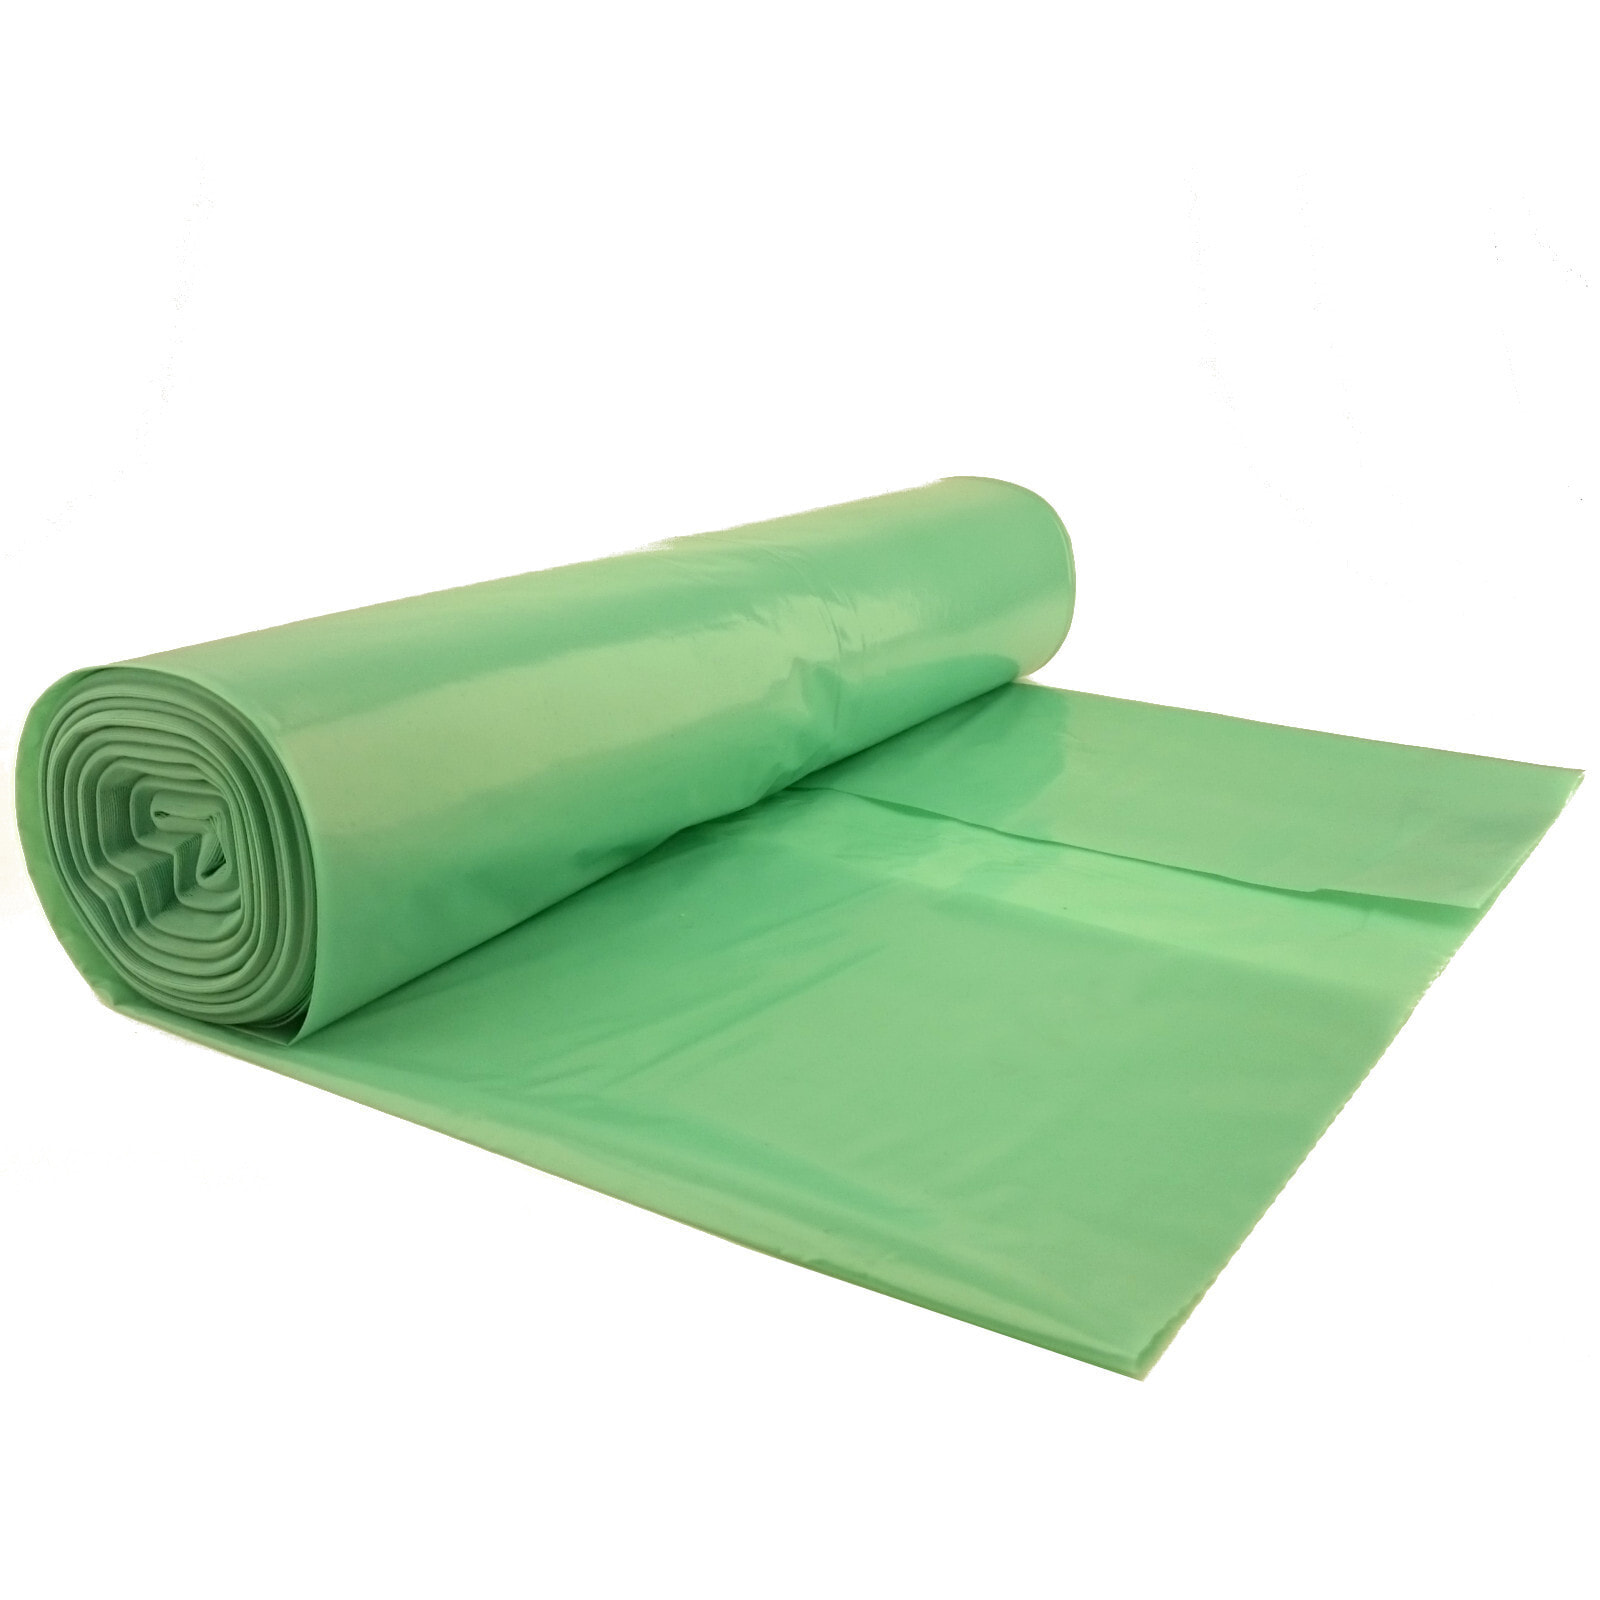 50 micron thick garbage bags. durable roll 25 pcs. - green 70L